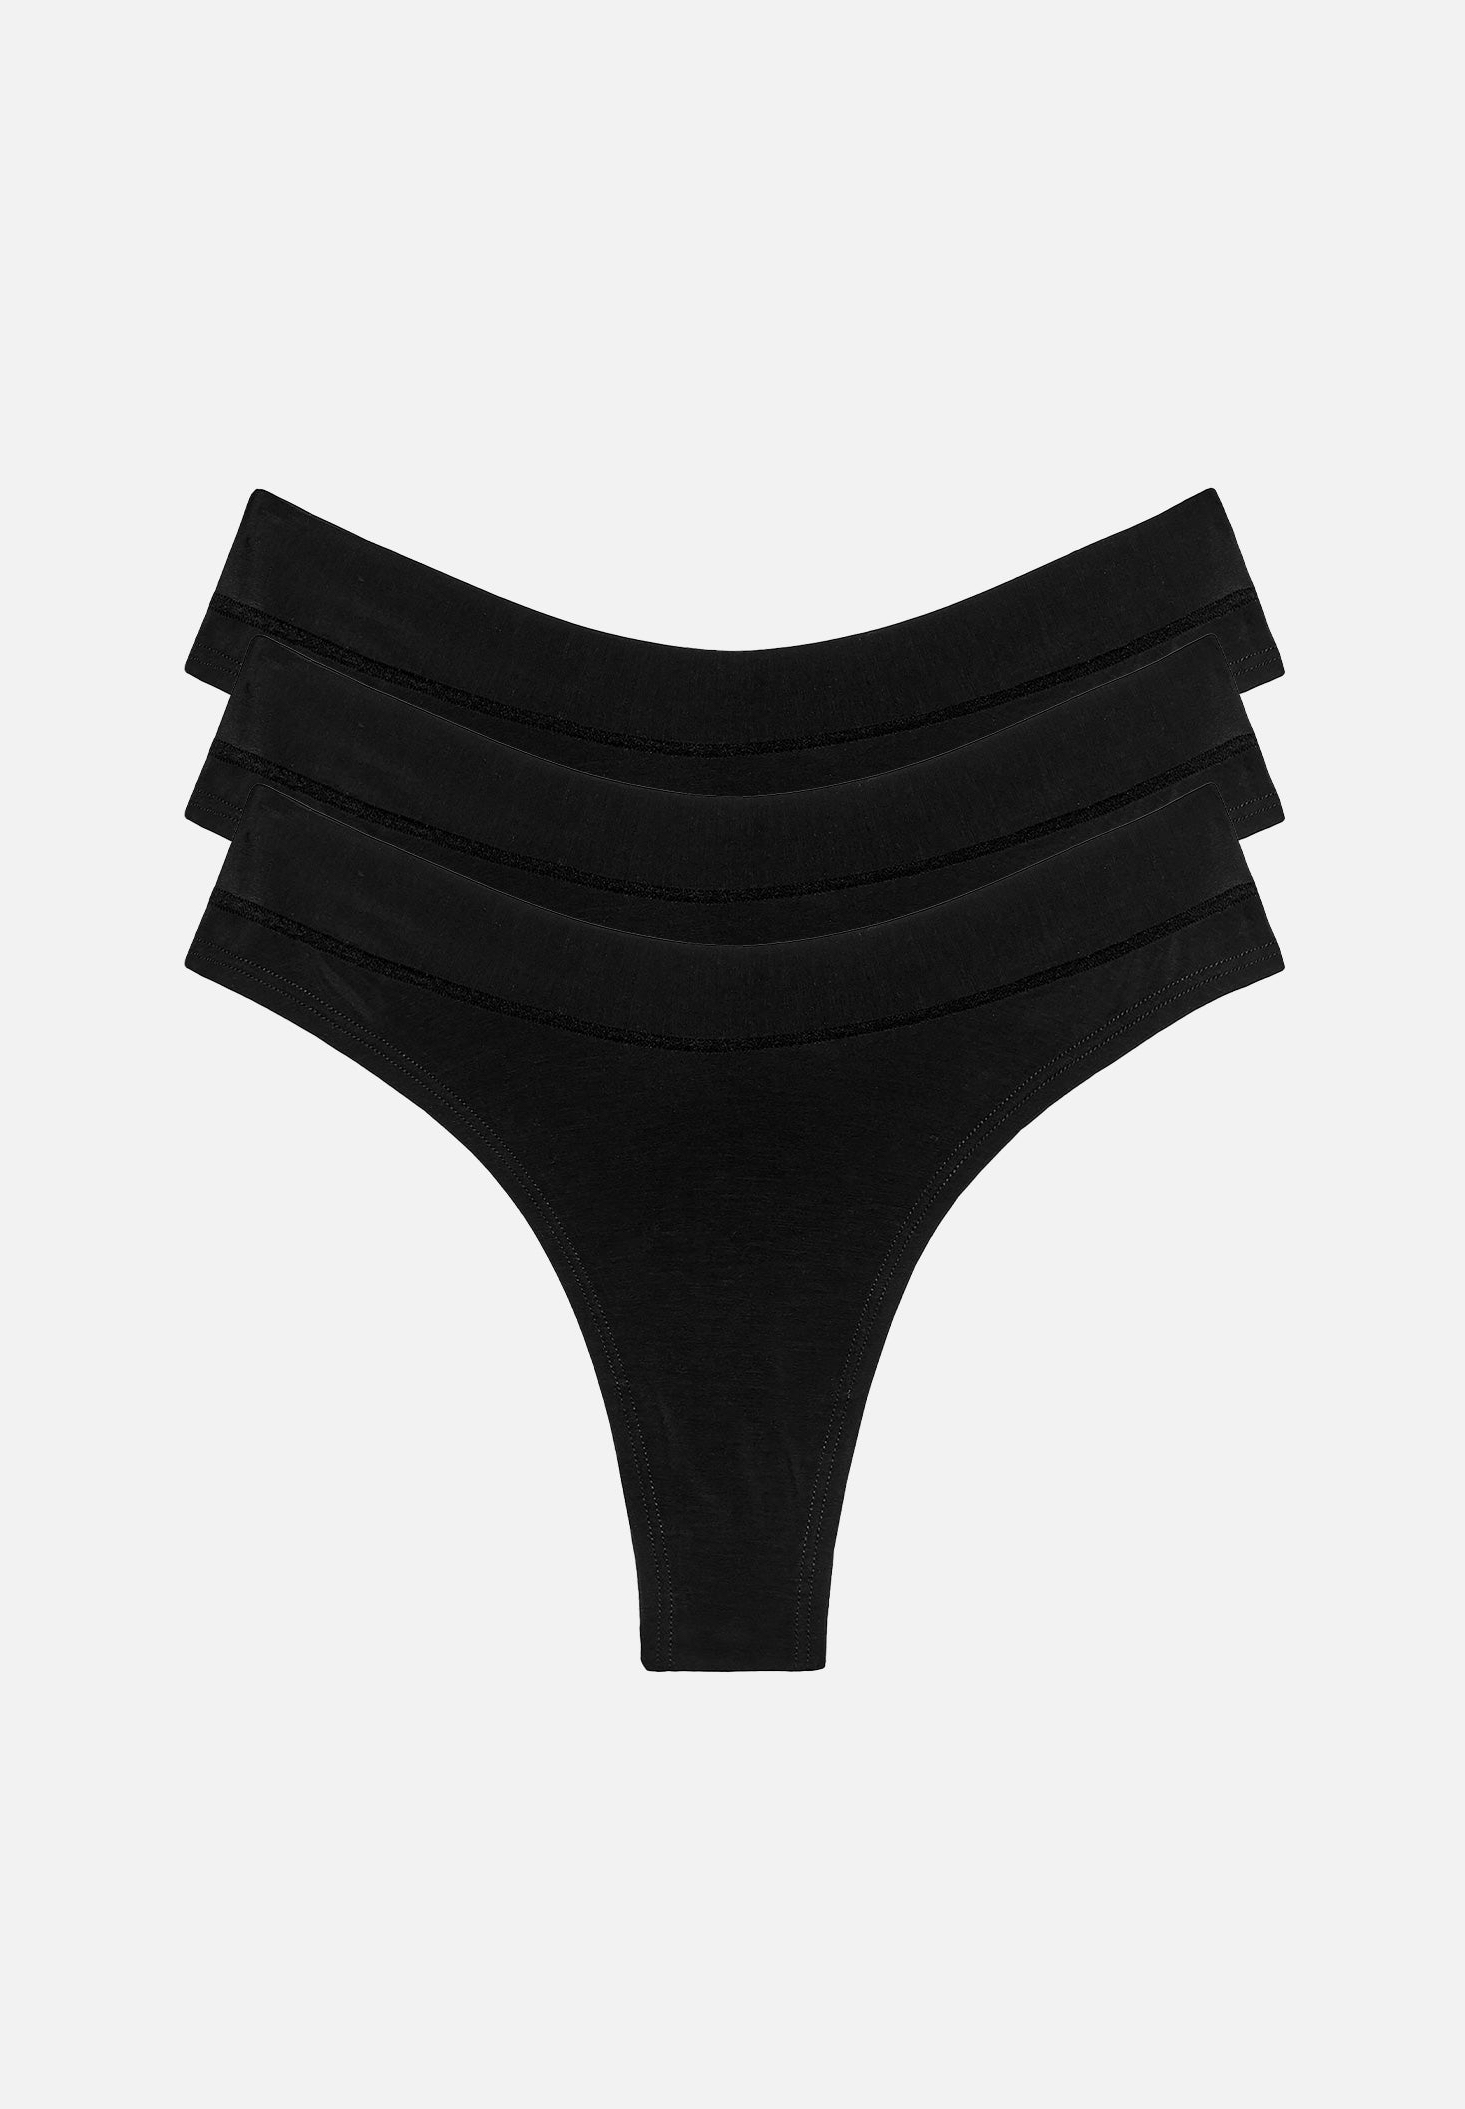 PACK OF 3 BLACK COTTON THONGS